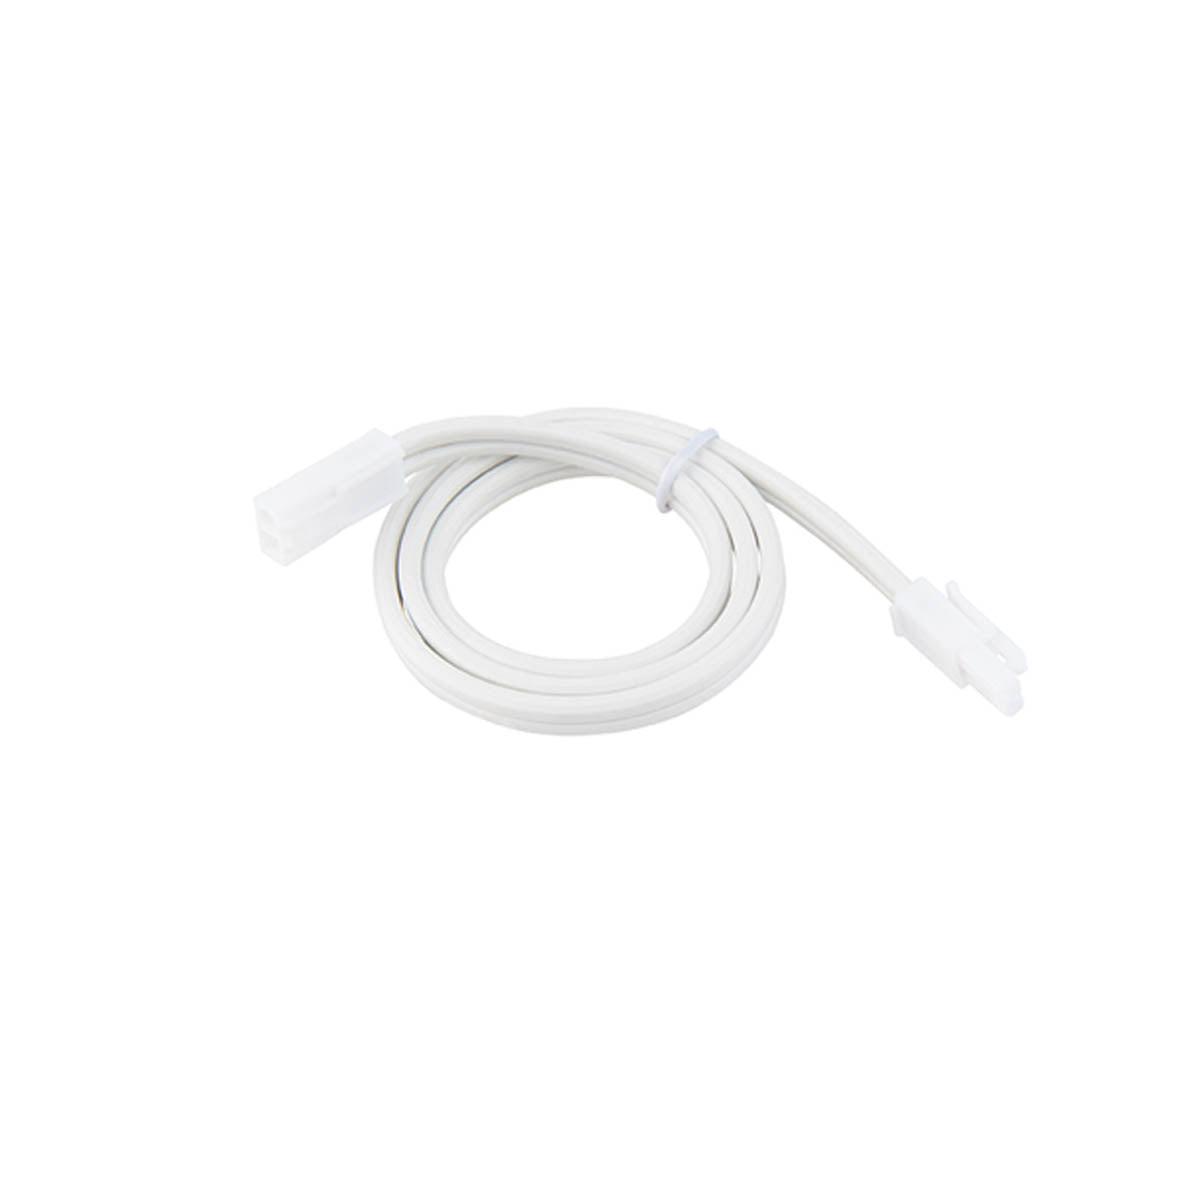 24in. Interconnect Cable for 3-CCT Puck Light, White - Bees Lighting